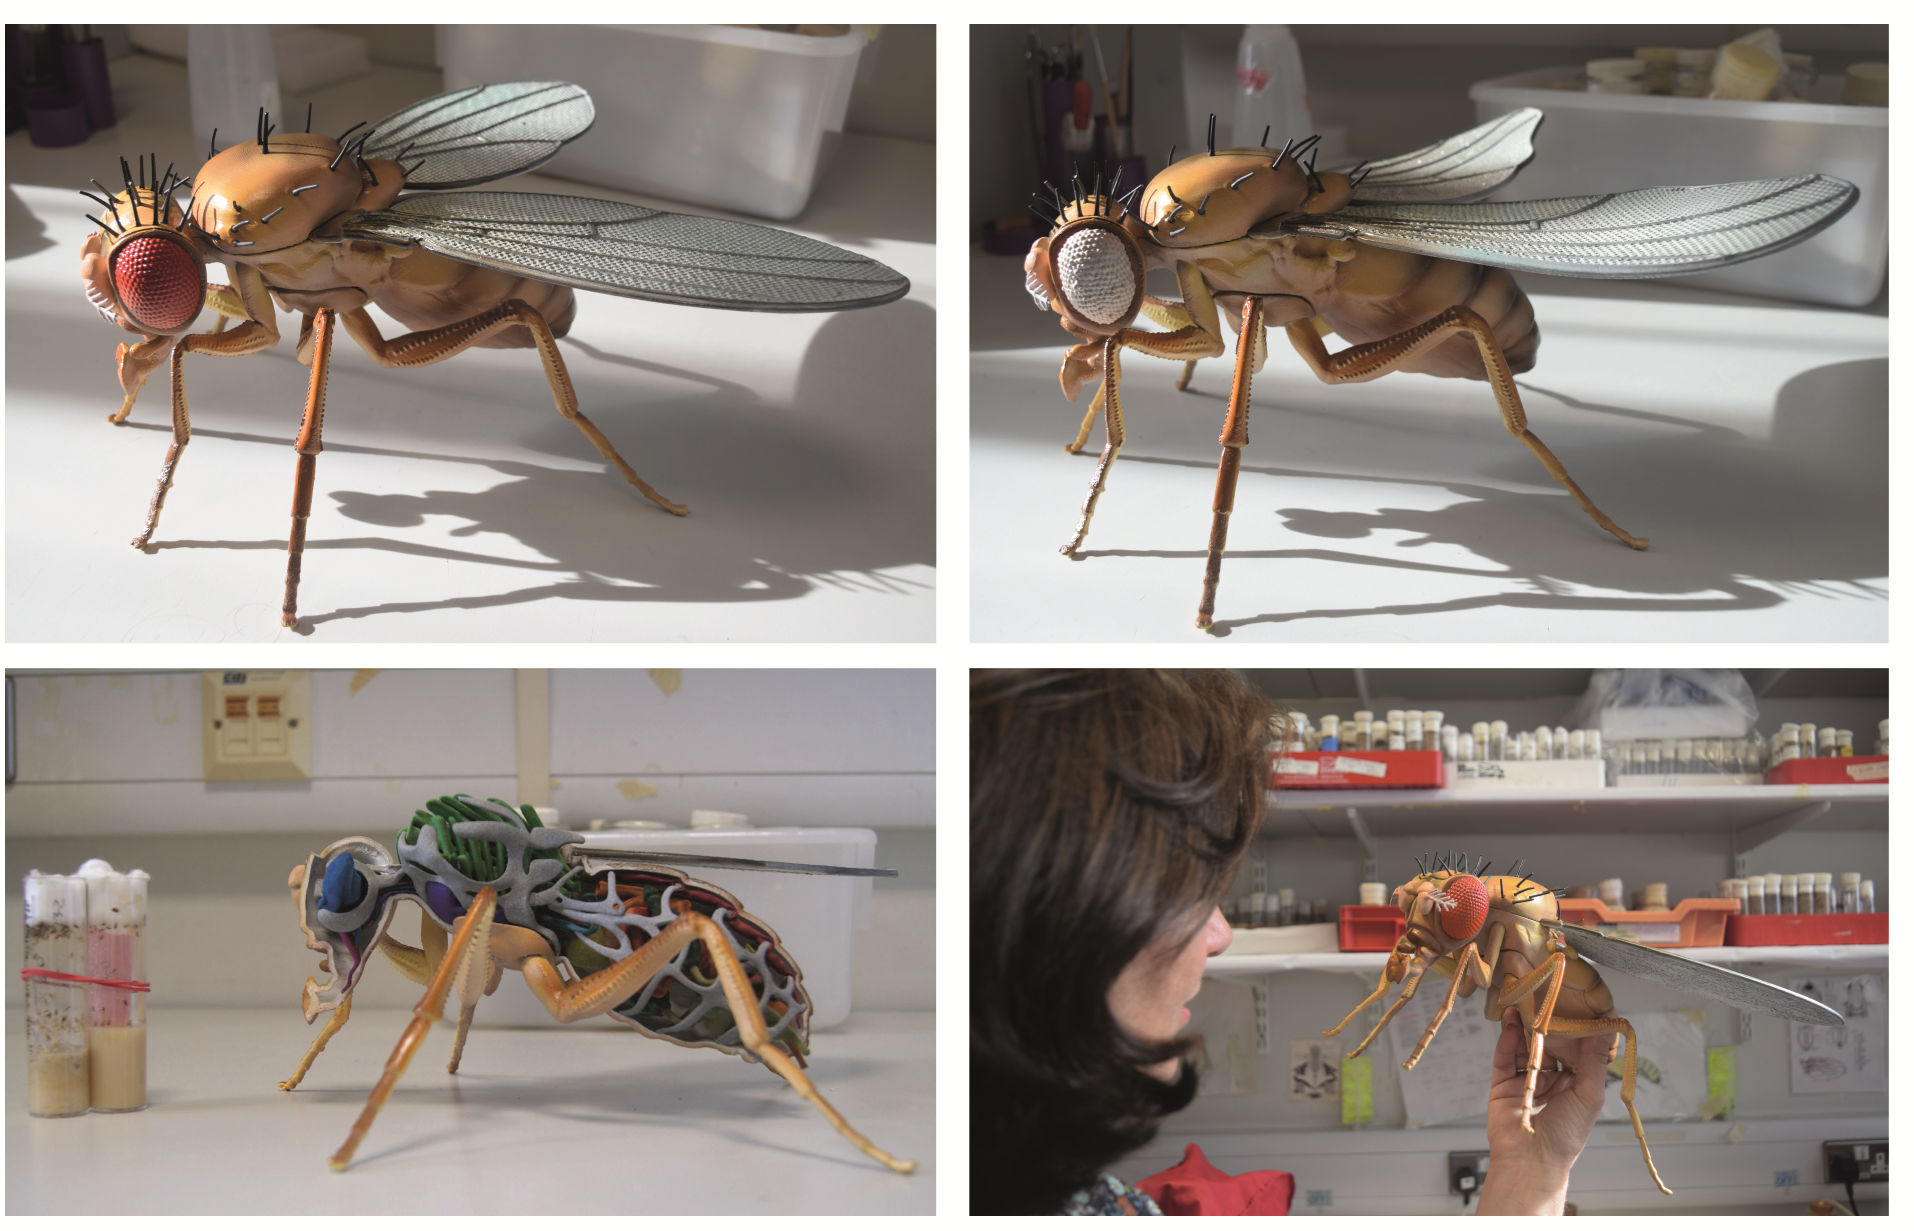 The 3D Printed Fruit fly